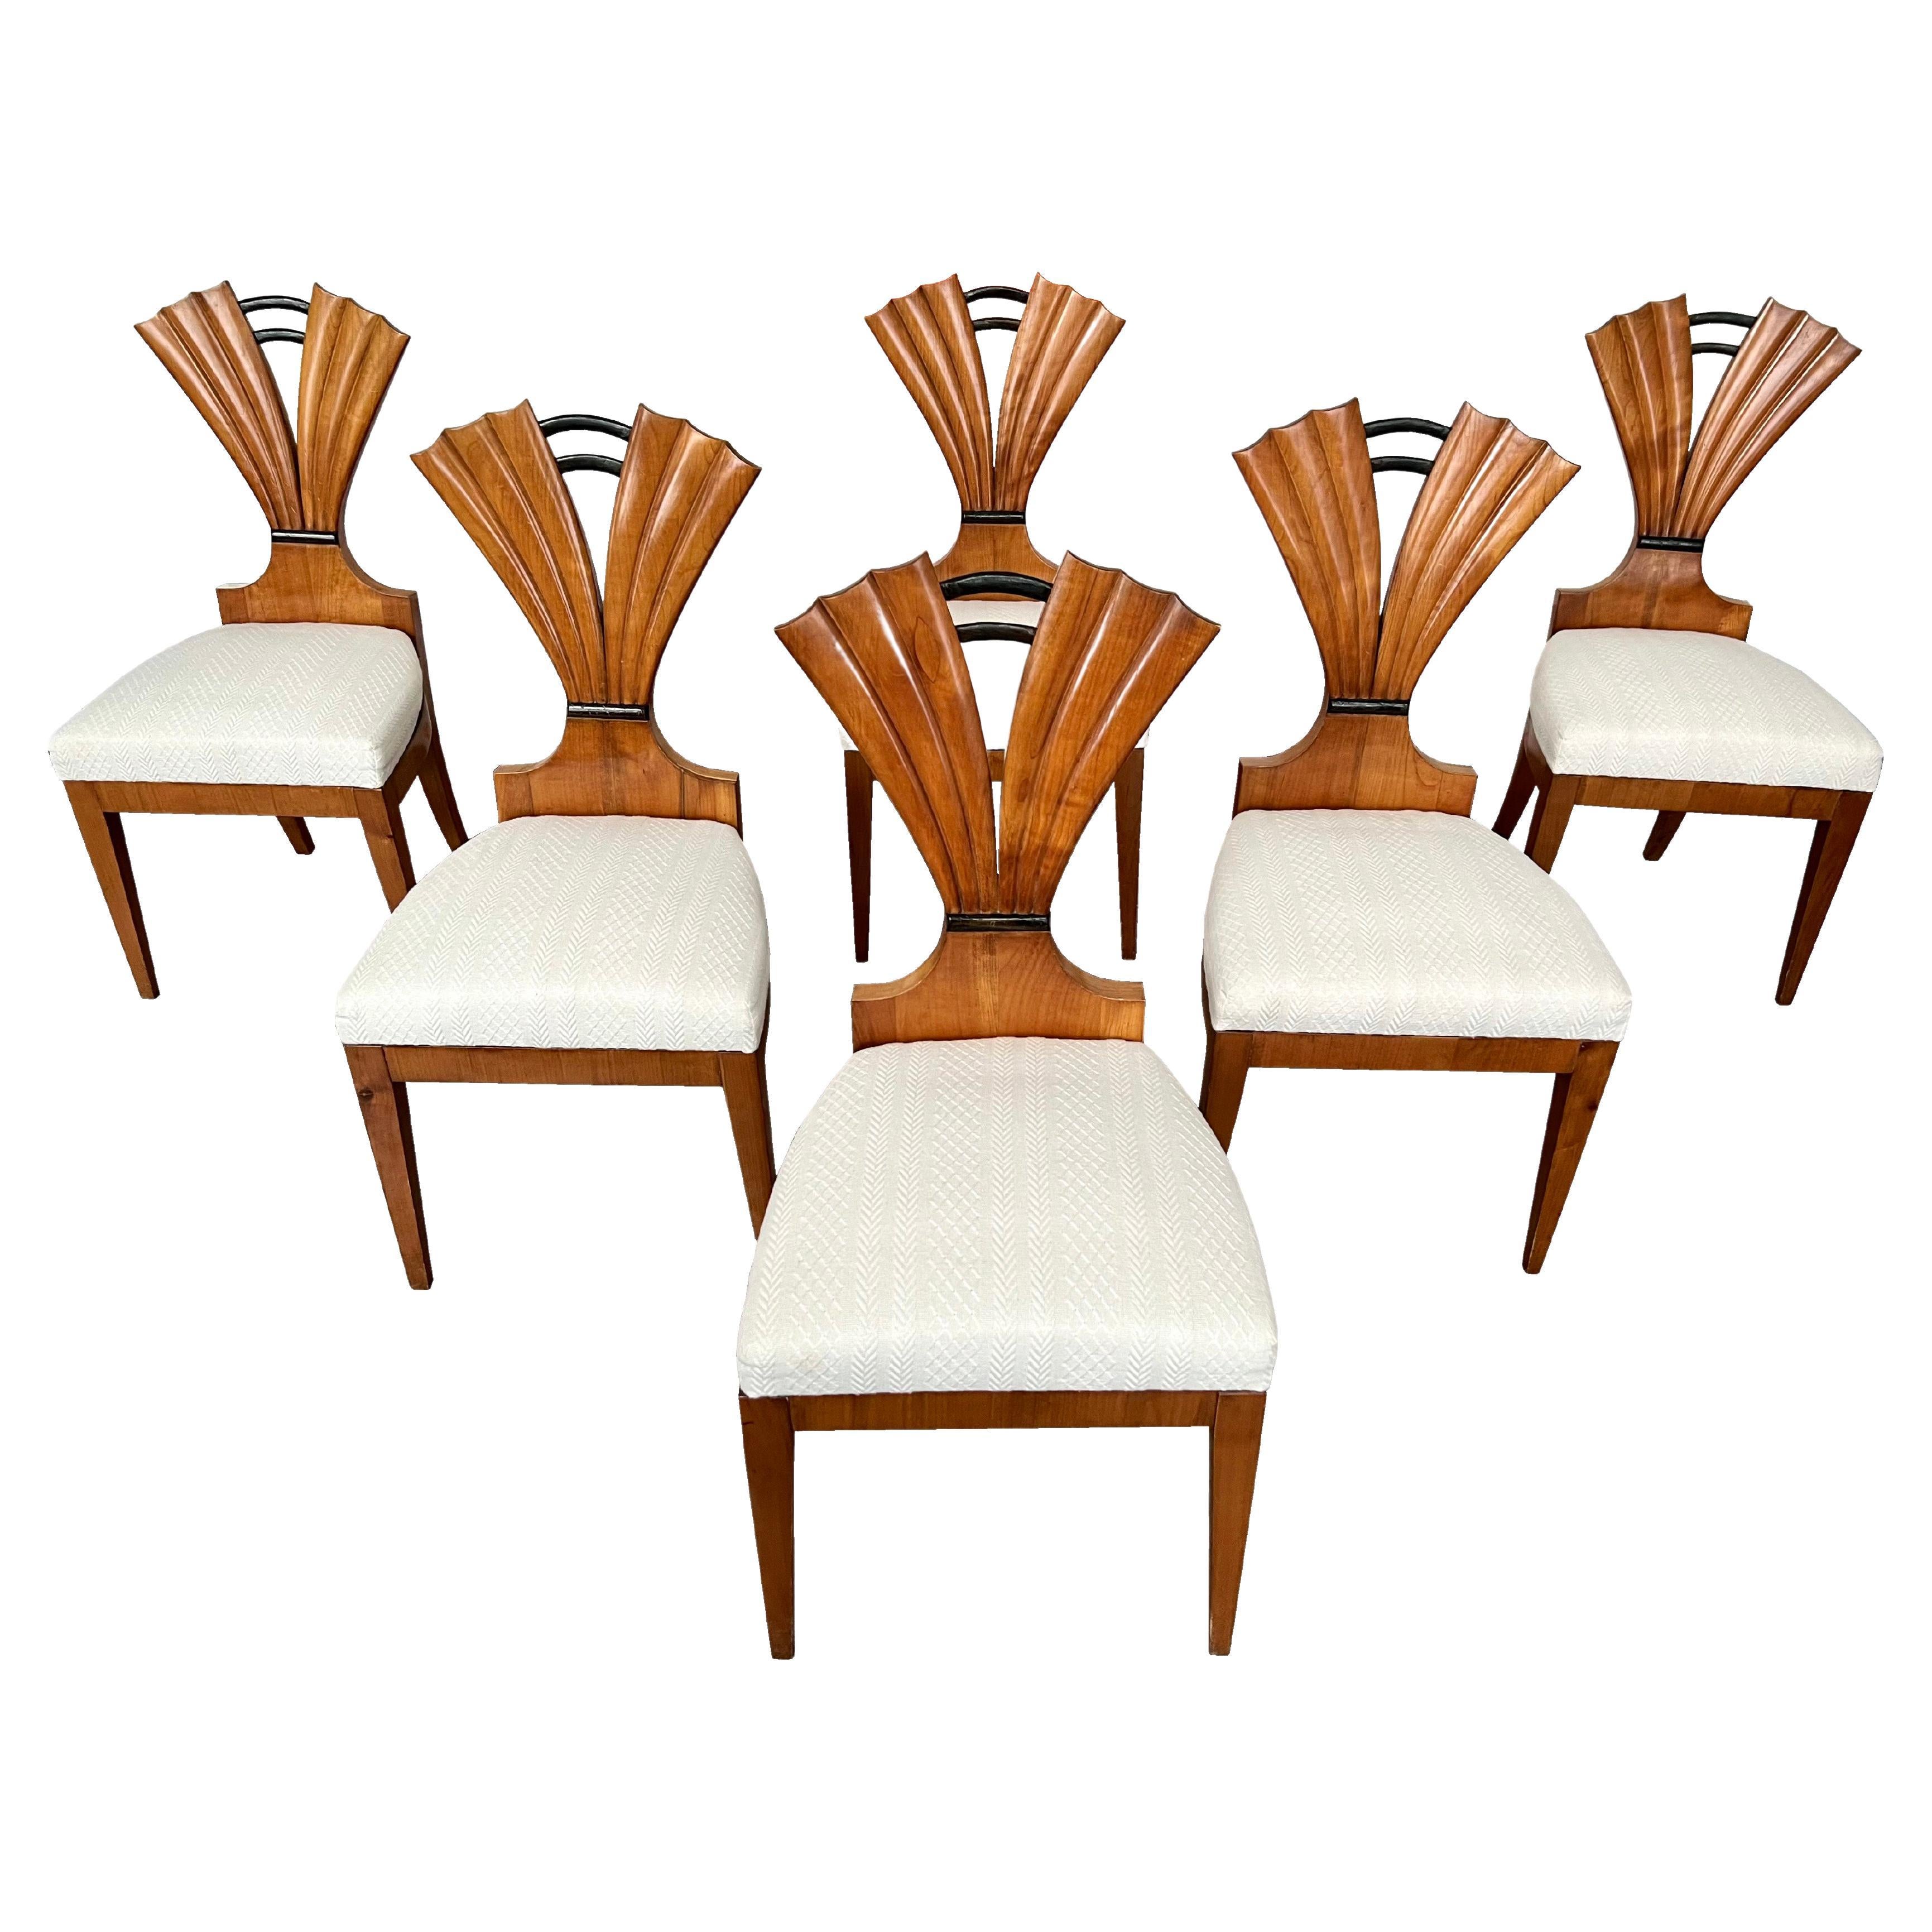 Hello,
These exceptional set of six Viennese Biedermeier cherry chairs from c, 1820-25 is attributed to Josef Danhauser who was the most prolific Viennese cabinet maker during the Biedermeier era. 
His pieces reflect innovative design and highest